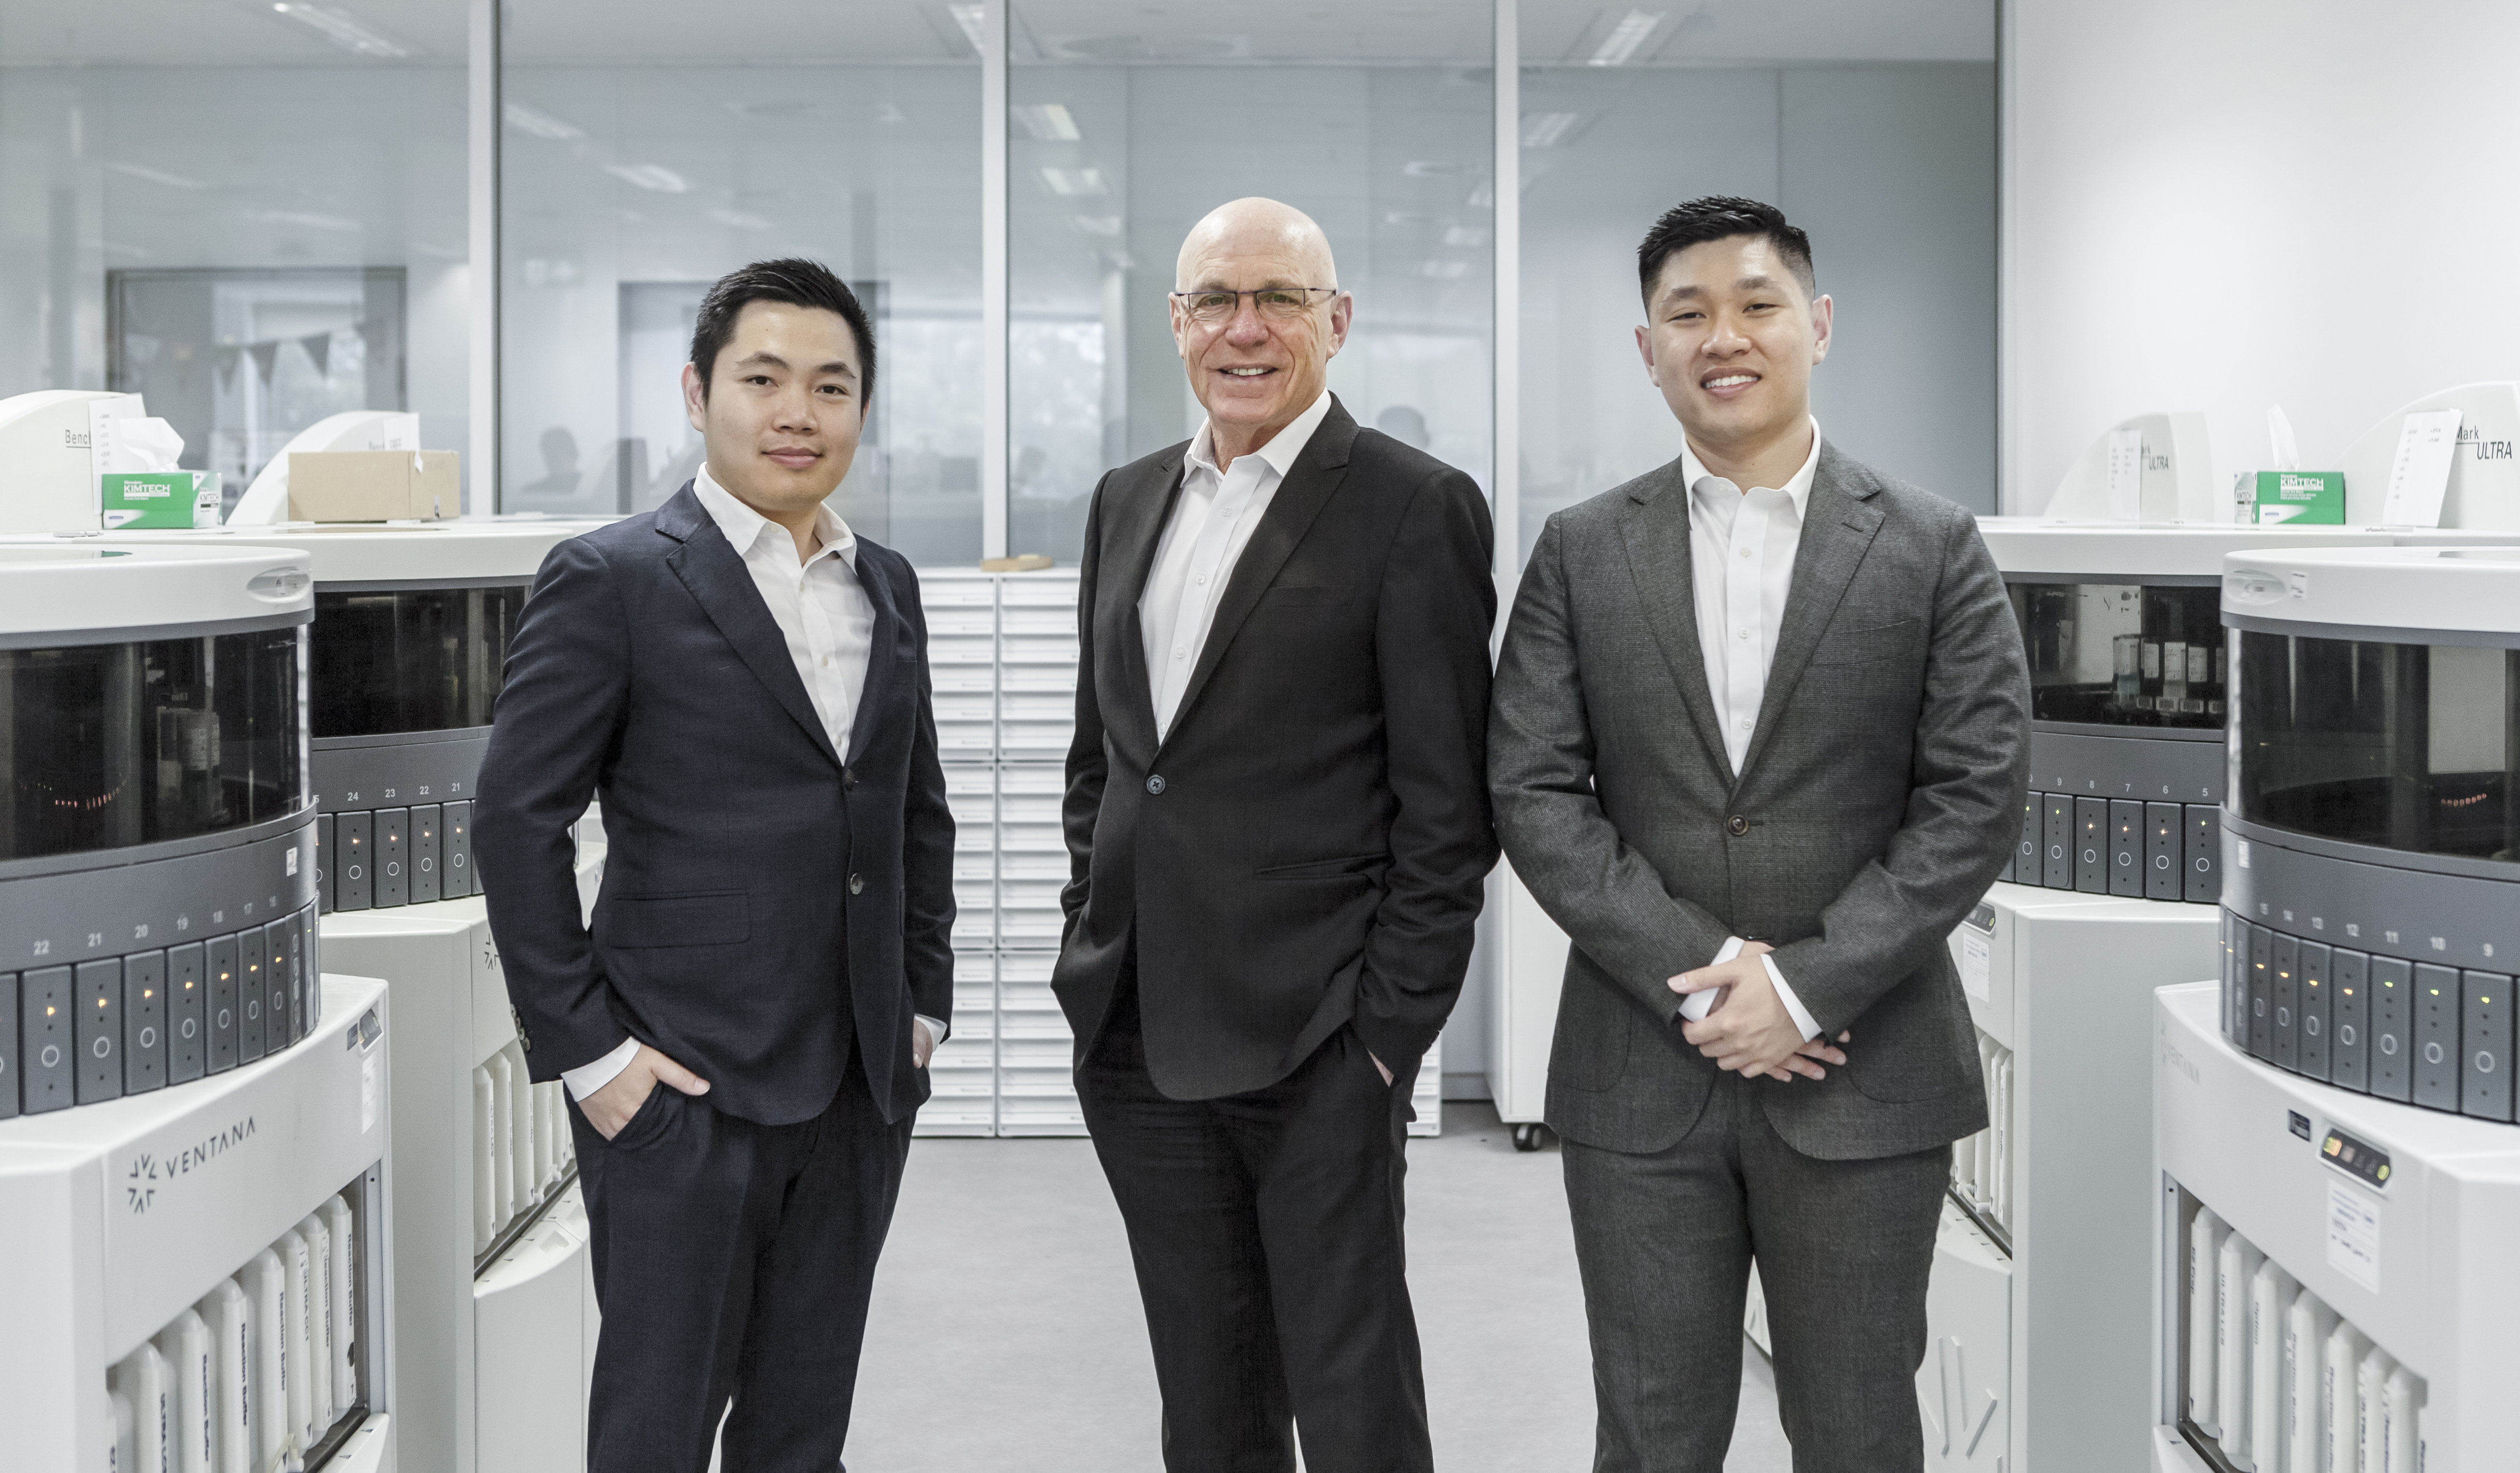 Harrison.ai founders Harrison.ai founders Dimitry Tran, Dr. Colin Goldschmidt and Dr. Aengus Tran